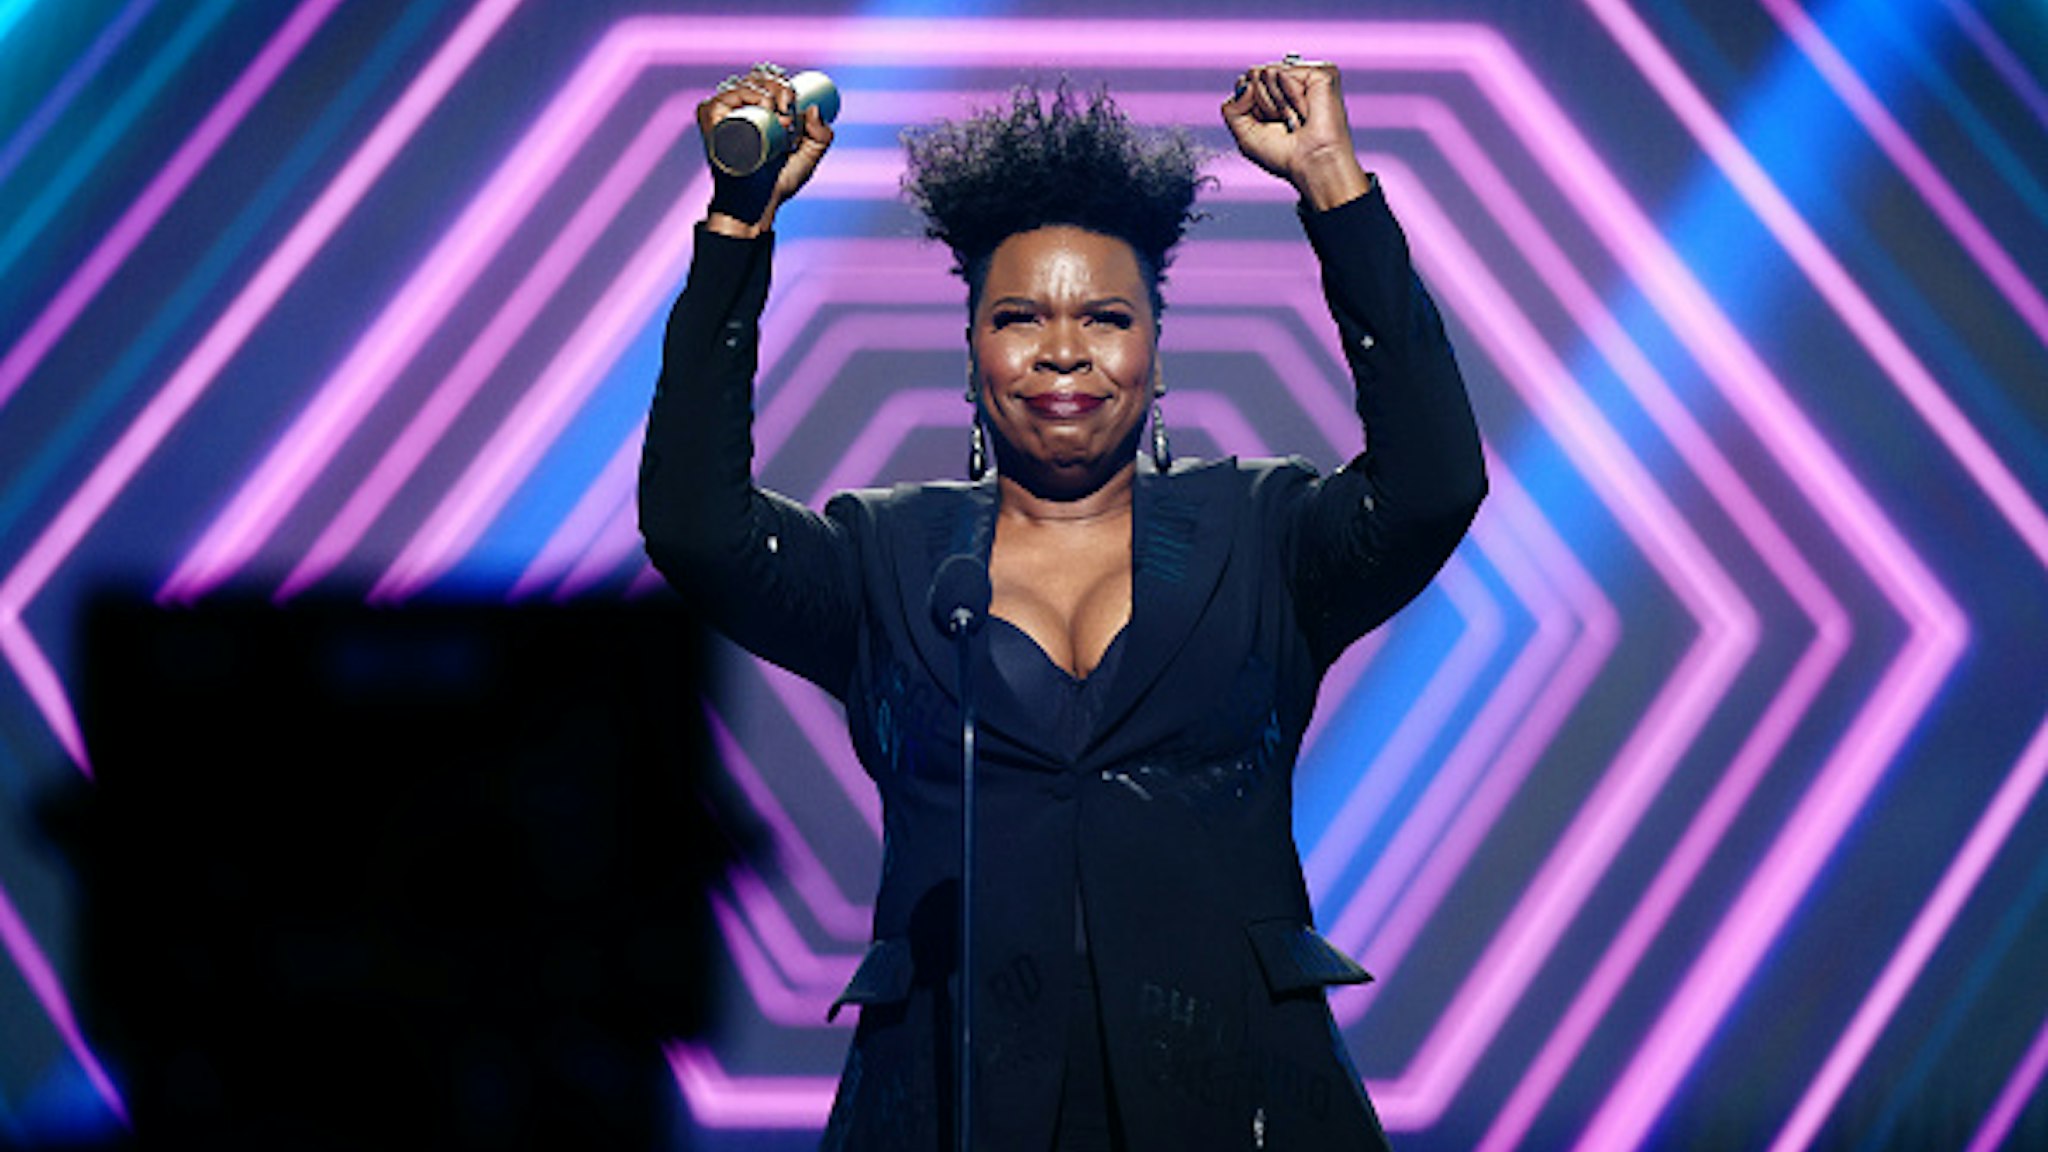 SANTA MONICA, CALIFORNIA - NOVEMBER 15: 2020 E! PEOPLE'S CHOICE AWARDS -- In this image released on November 15, Leslie Jones, The Comedy Act of 2020, accepts the award onstage for the 2020 E! People's Choice Awards held at the Barker Hangar in Santa Monica, California and on broadcast on Sunday, November 15, 2020.